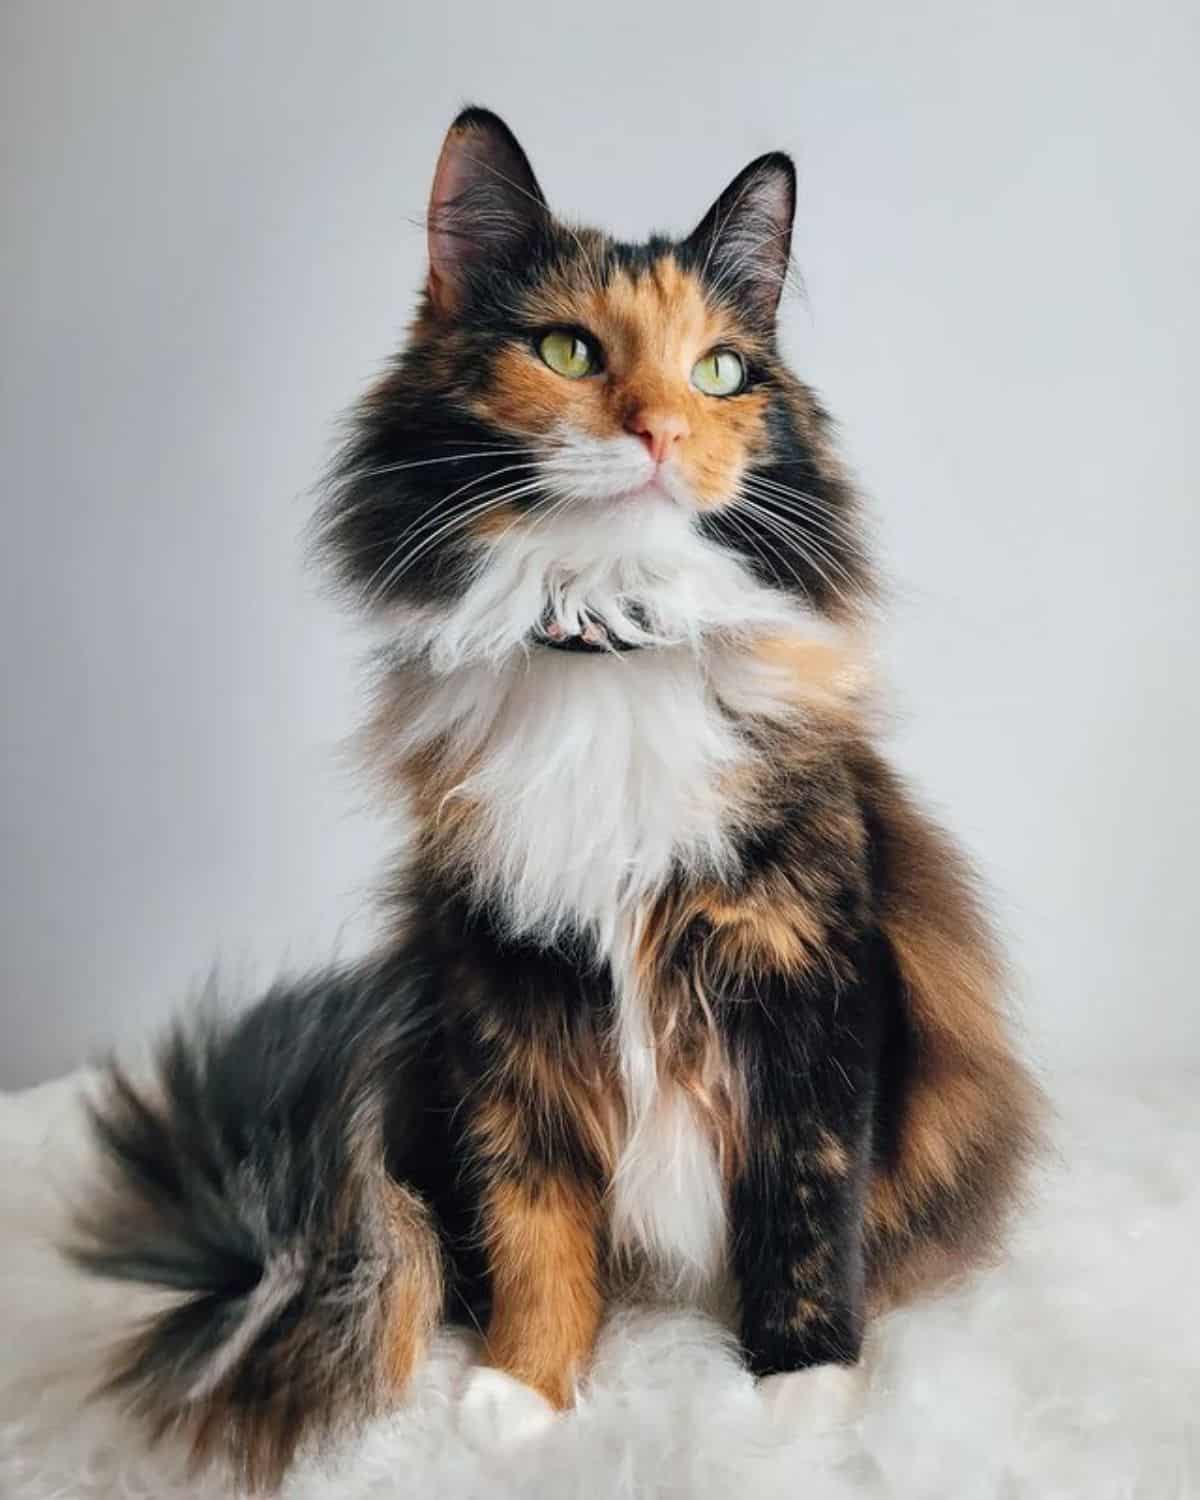 A beautiful calico maine coon sitting on a white fur.